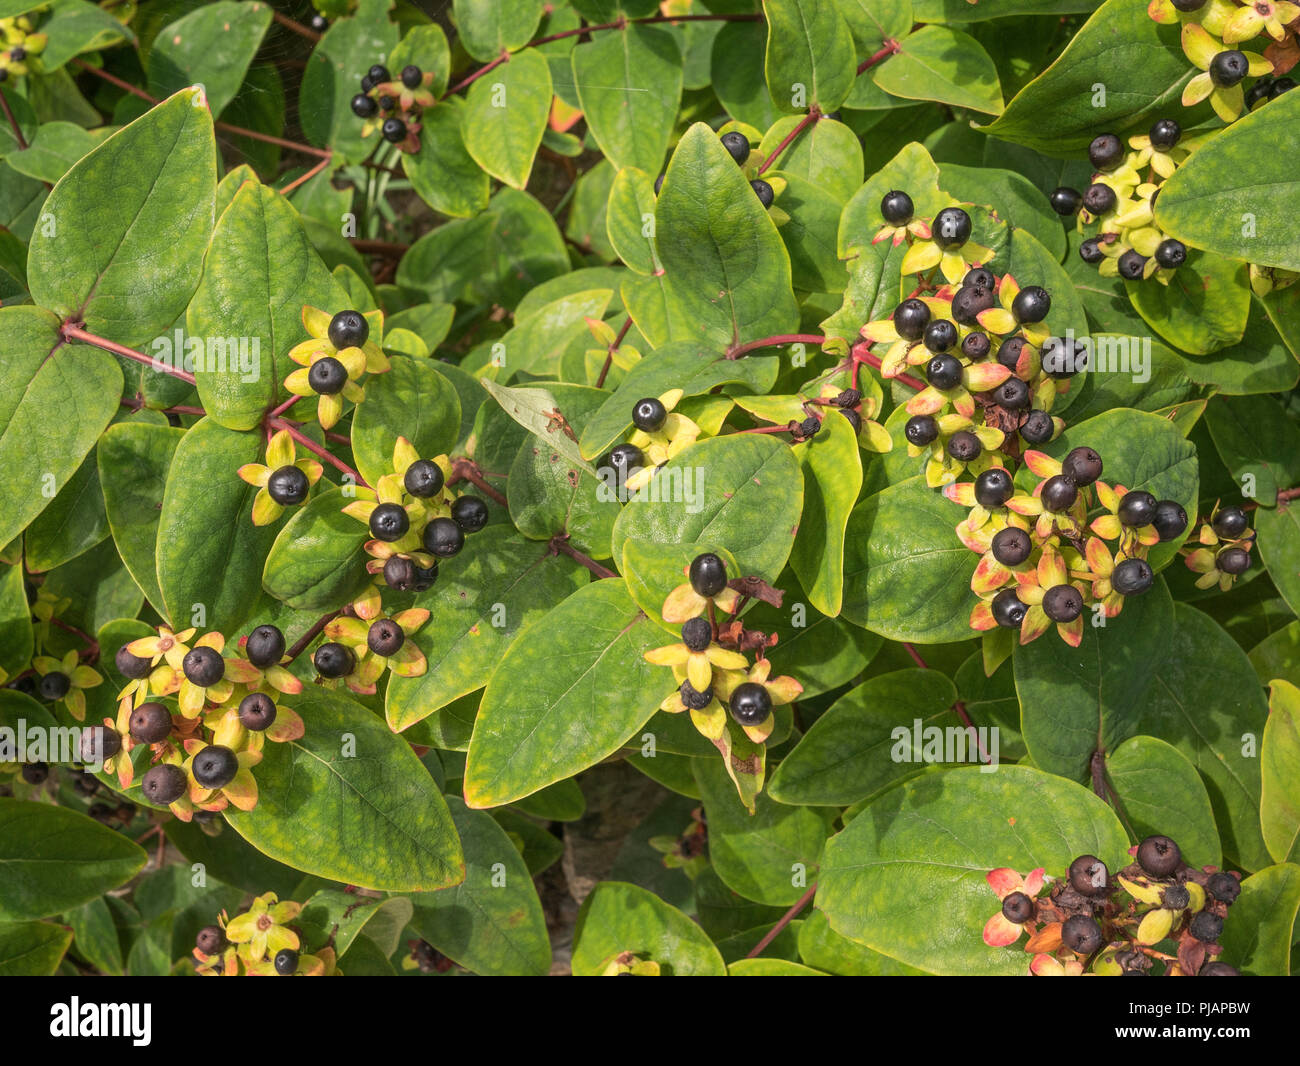 Black berries of Tutsan / Hypericum androsaemum in sunshine. Tutsan was used as a medicinal herbal wound plant, and is related to St. John's Wort. Stock Photo